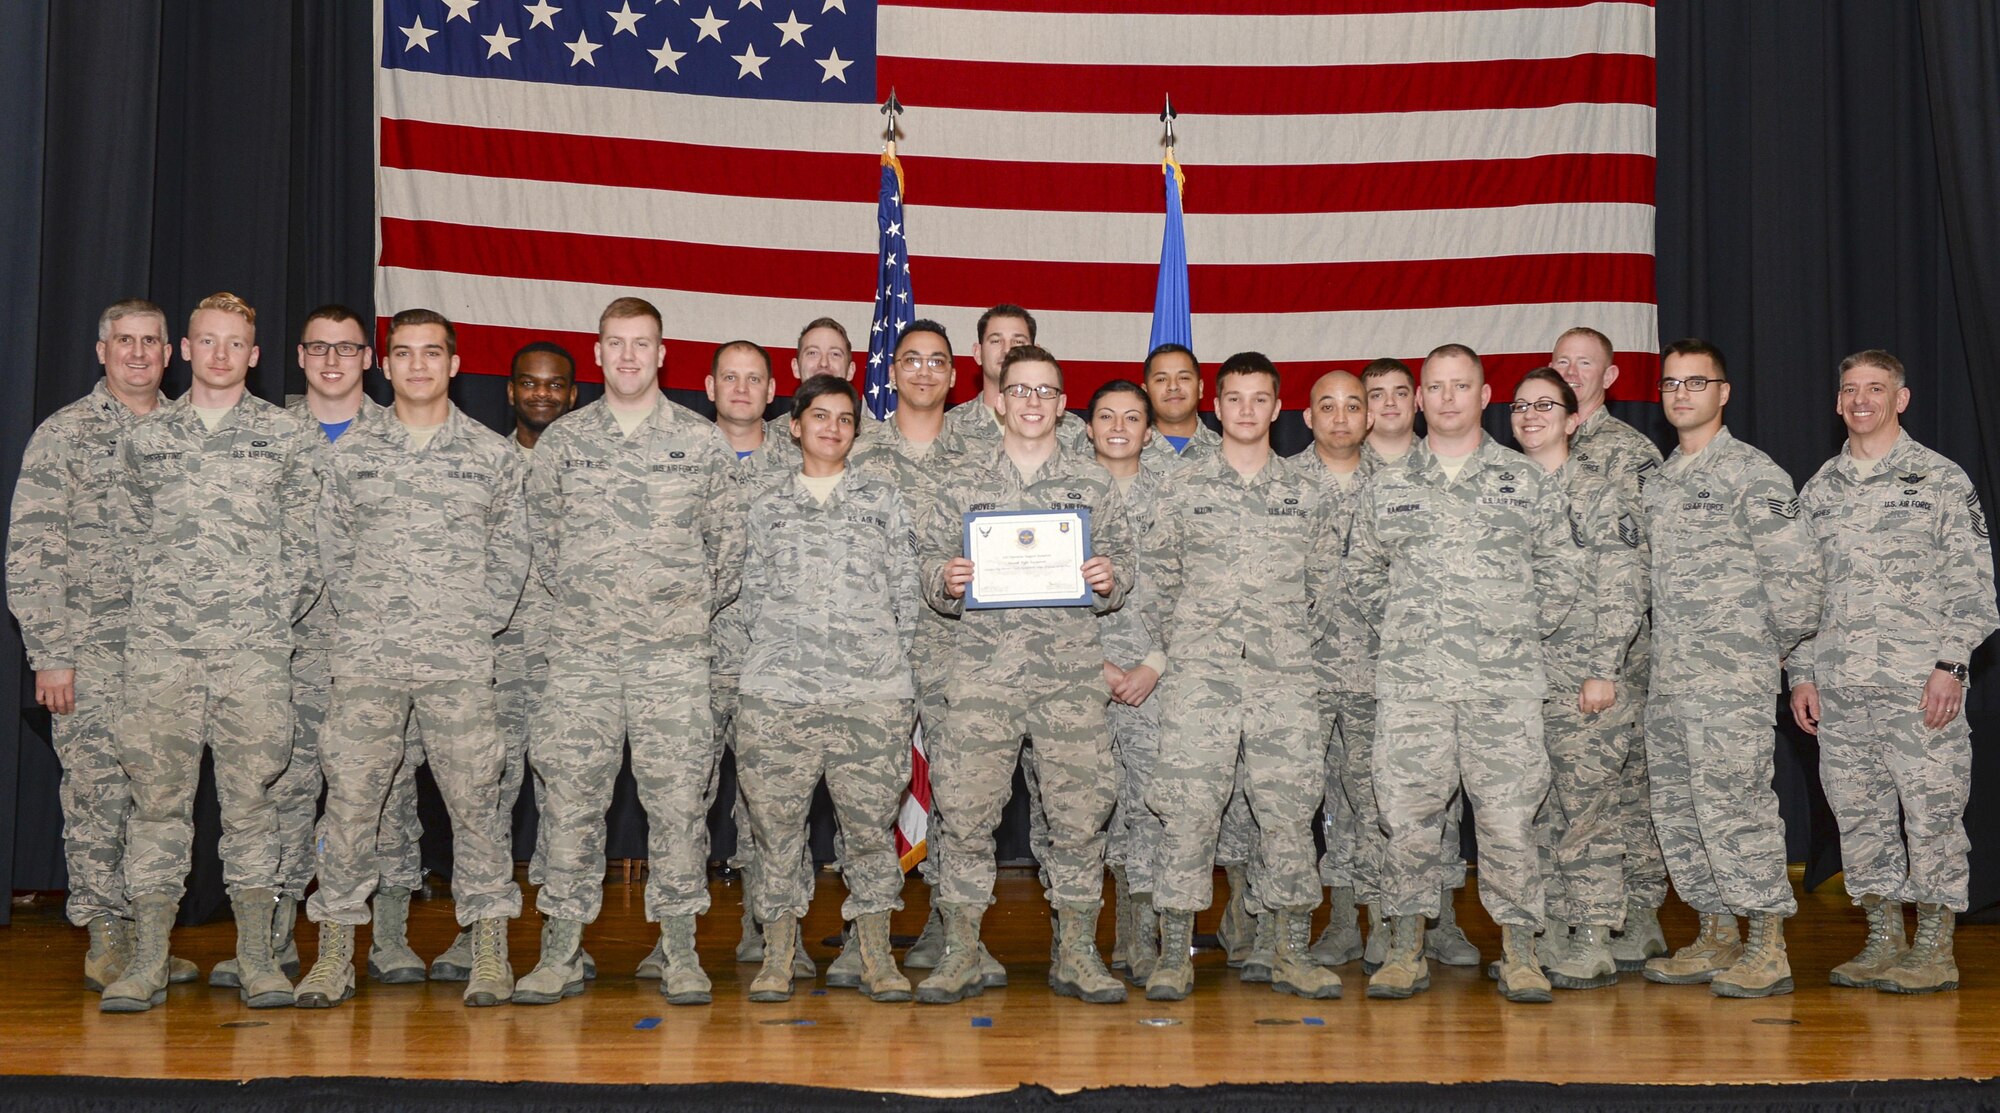 Airmen assigned to 22nd Operations Support Squadron Aircrew Flight Equipment pose for a photo during an award ceremony, Jan. 13, 2017, at McConnell Air Force Base, Kan. The flight was recognized as a team with the 2016 U.S. Air Force AFE Outstanding Large Program Award. (U.S. Air Force photo/Senior Airman Colby Hardin)